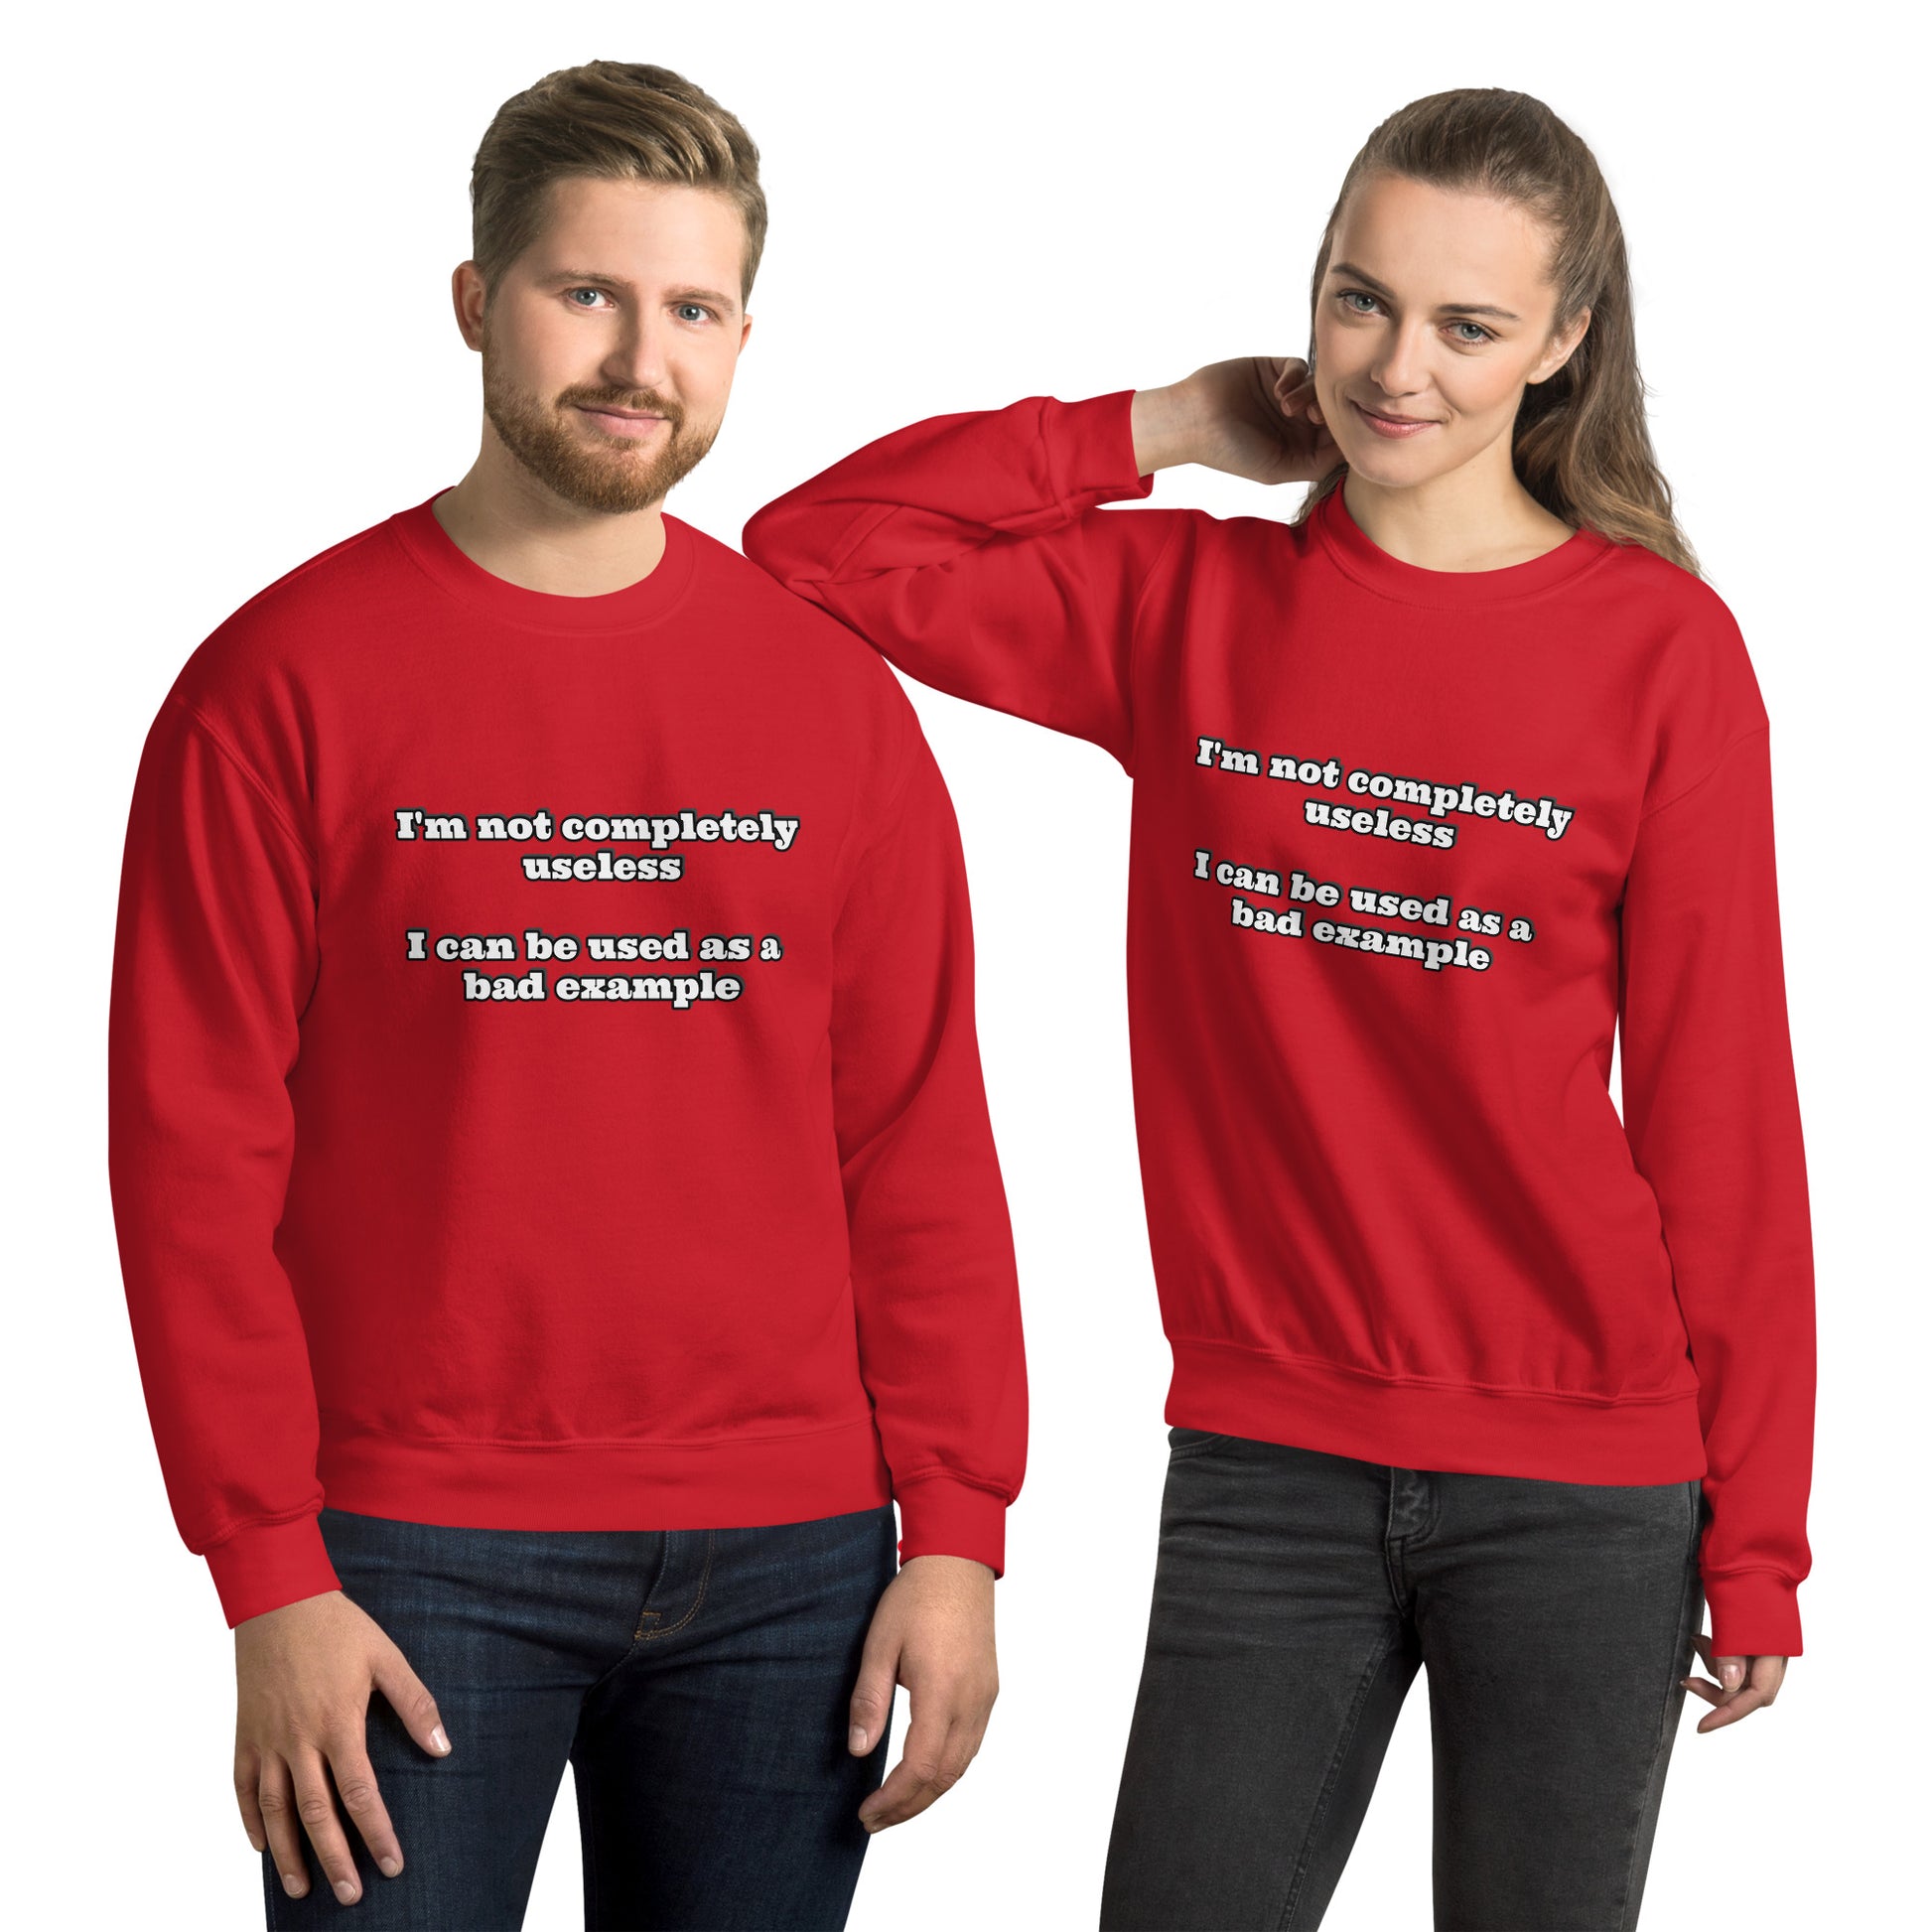 Man and women with red sweatshirt with text “I'm not completely useless I can be used as a bad example”